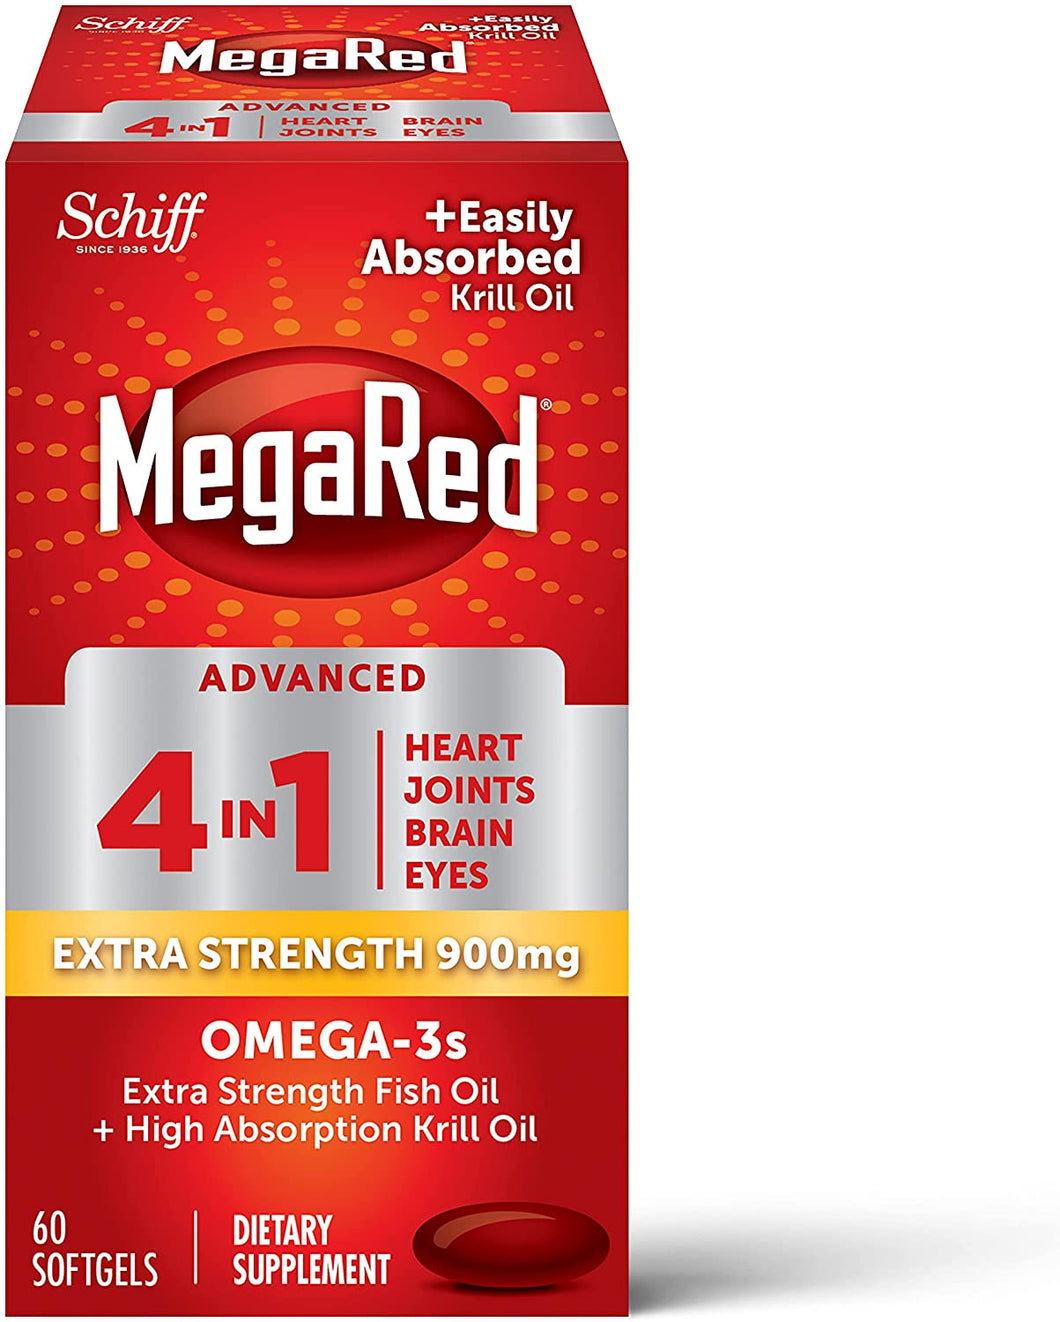 ITEM# 0088   MegaRed Fish Oil + Krill Oil 900mg Omega 3 Supplement with EPA & DHA, Supports Heart, Brain, Joint and Eye Health, No Fishy Aftertaste (Watch Video)